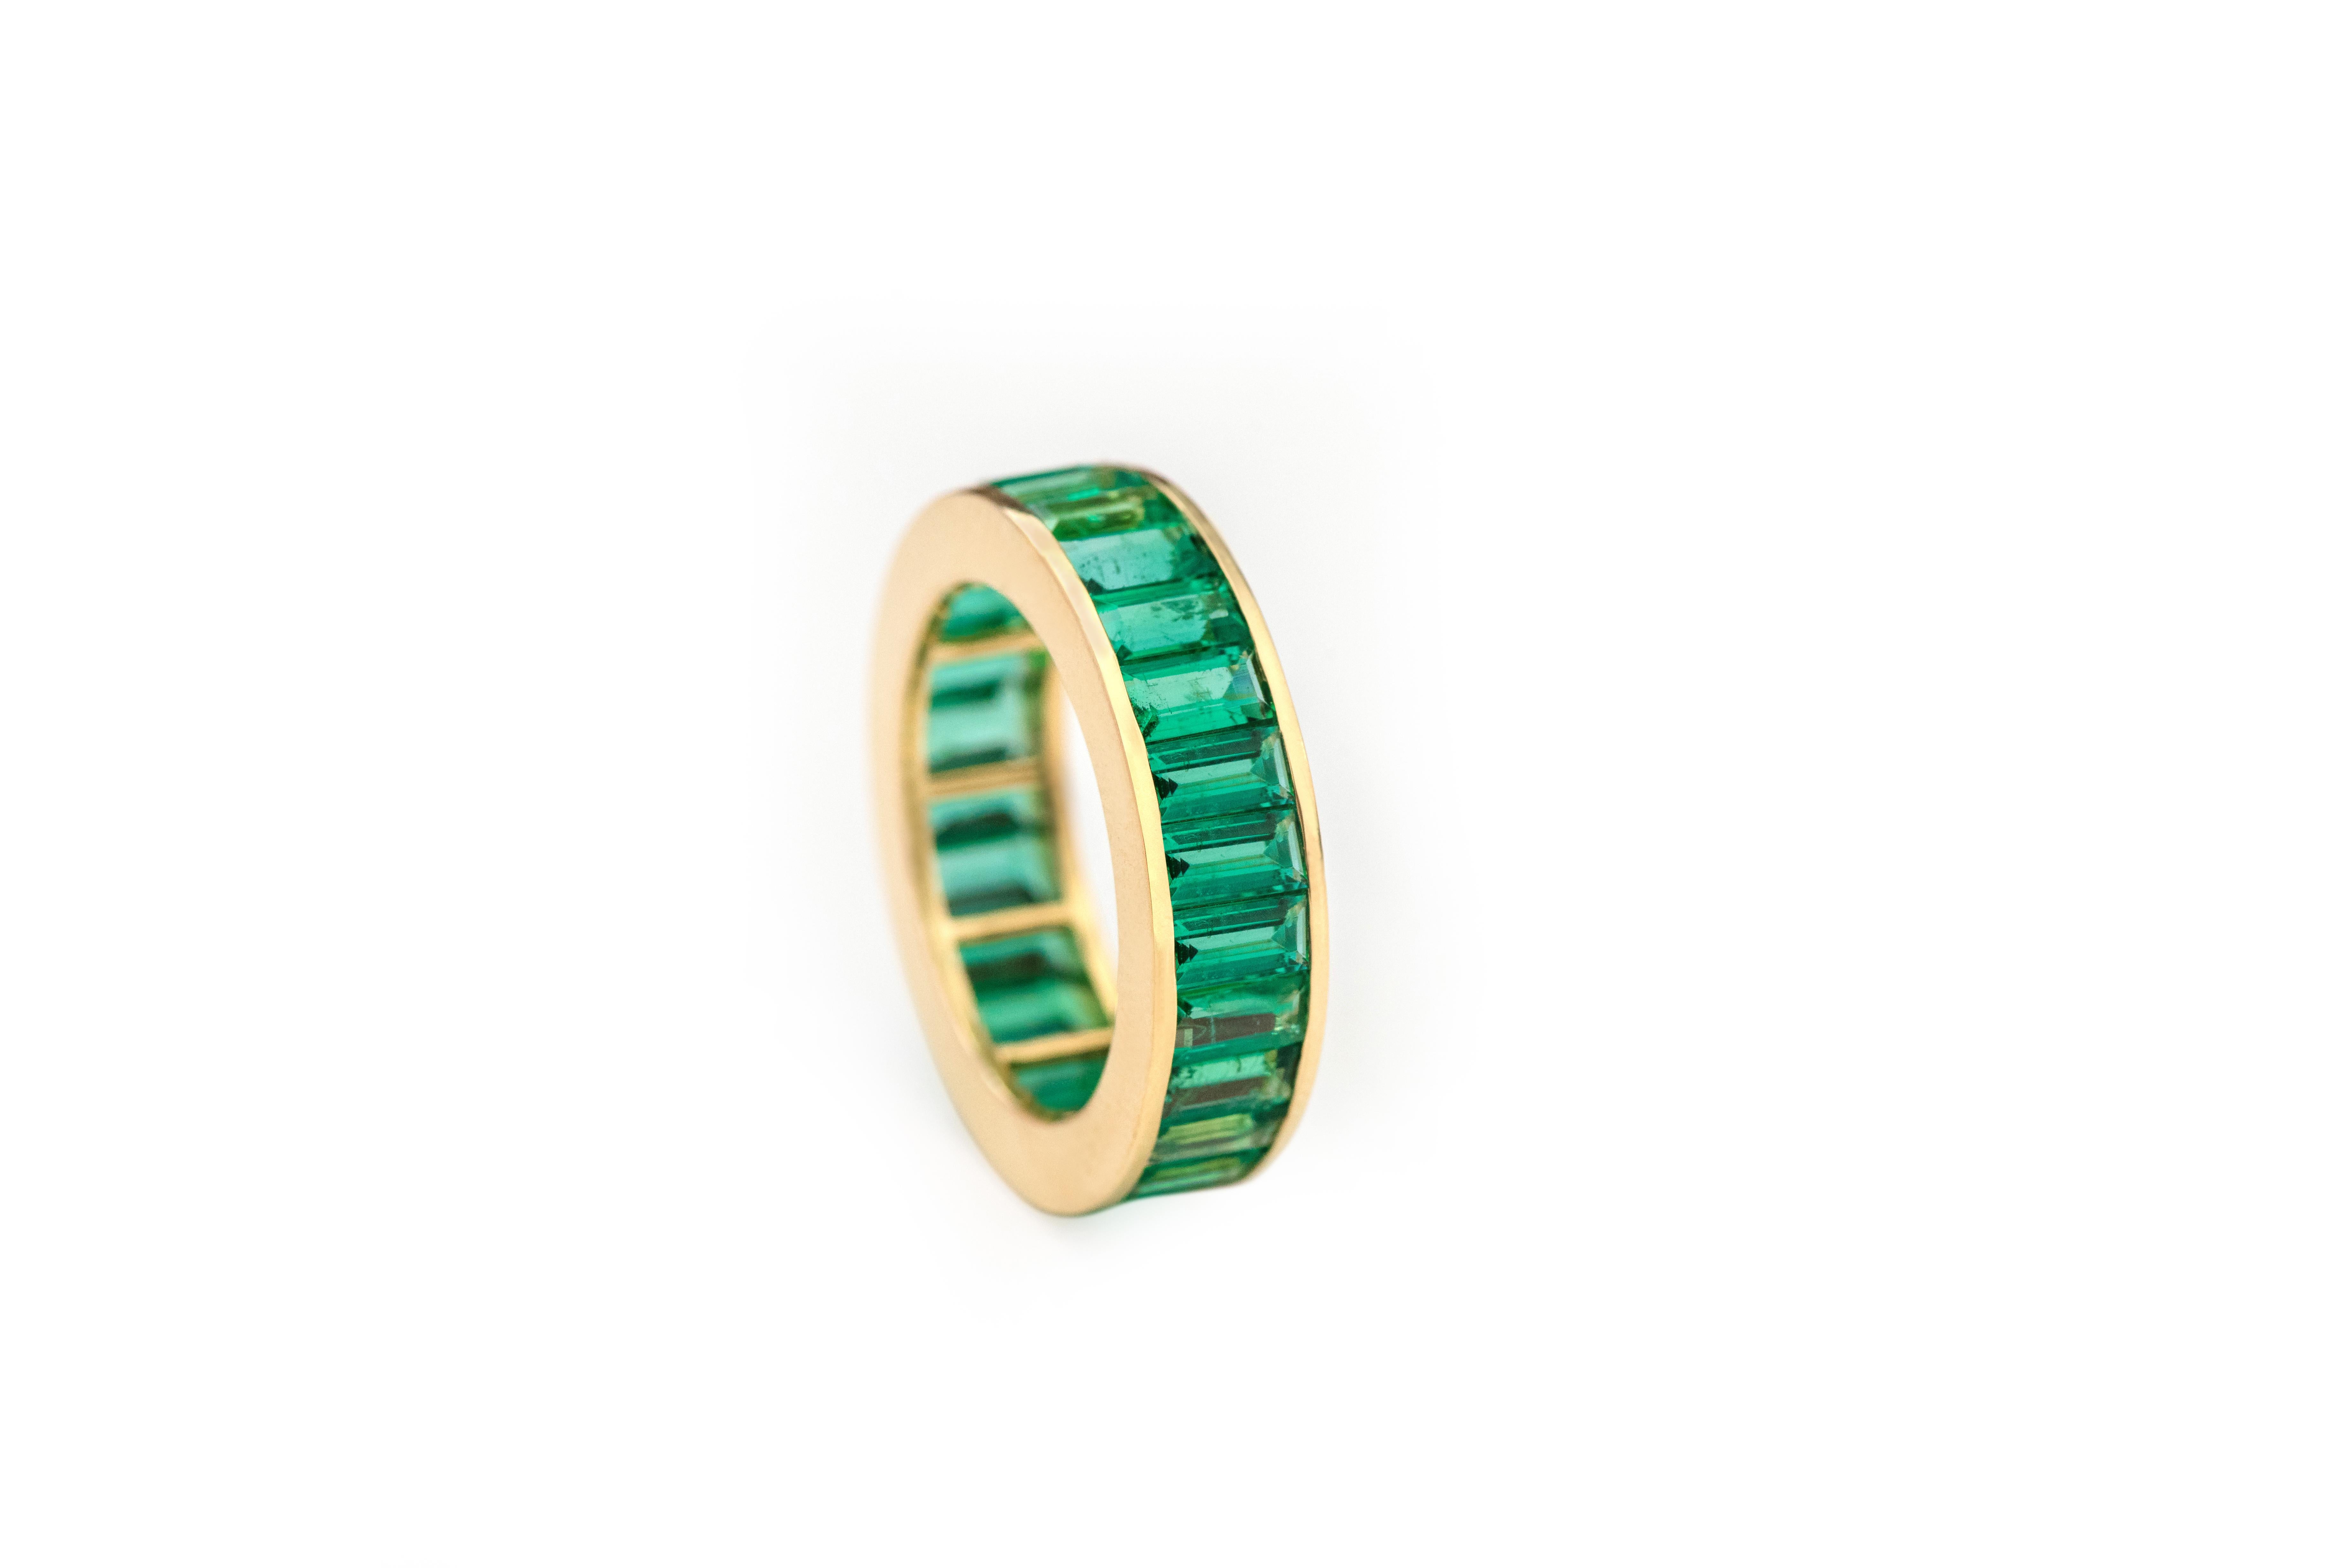 18 Karat Yellow Gold 5.39 Carat Baguette-Cut Natural Emerald Eternity Band Ring

This beautiful vibrant green emerald band is a class apart. The buyer’s choice as it stands for an astoundingly perfect cut of baguette-cut emeralds embellished in the